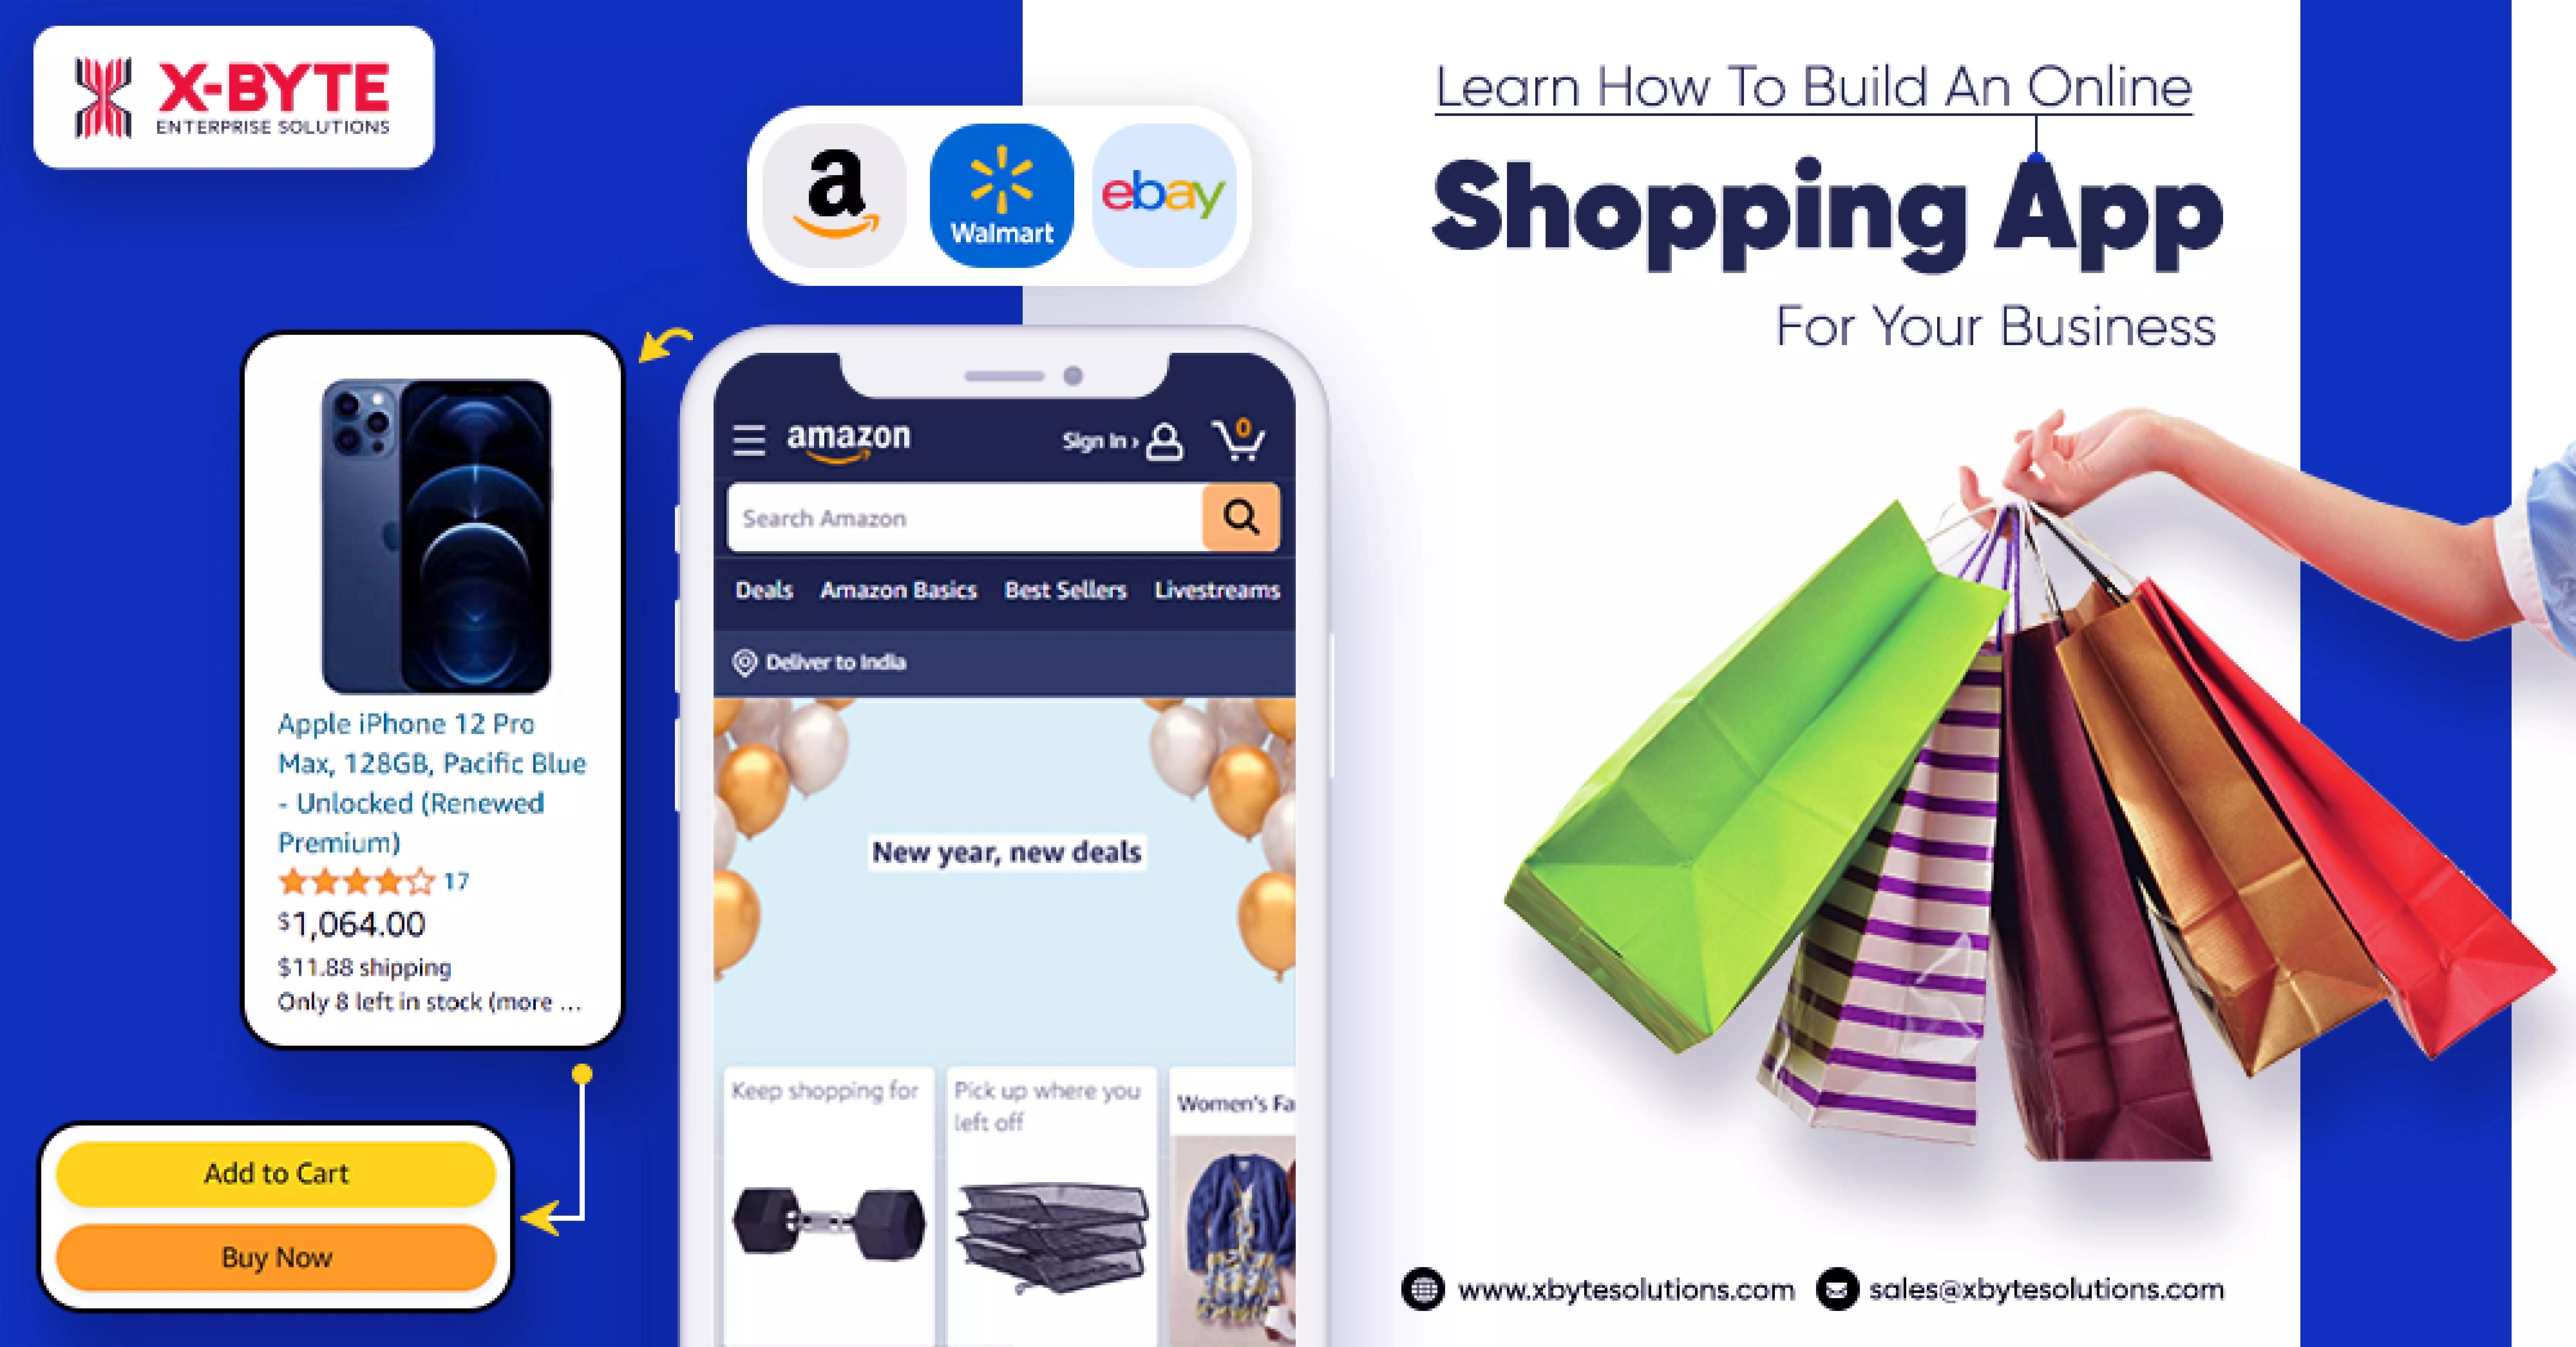 Learn How To Build An Online Shopping App For Your Business